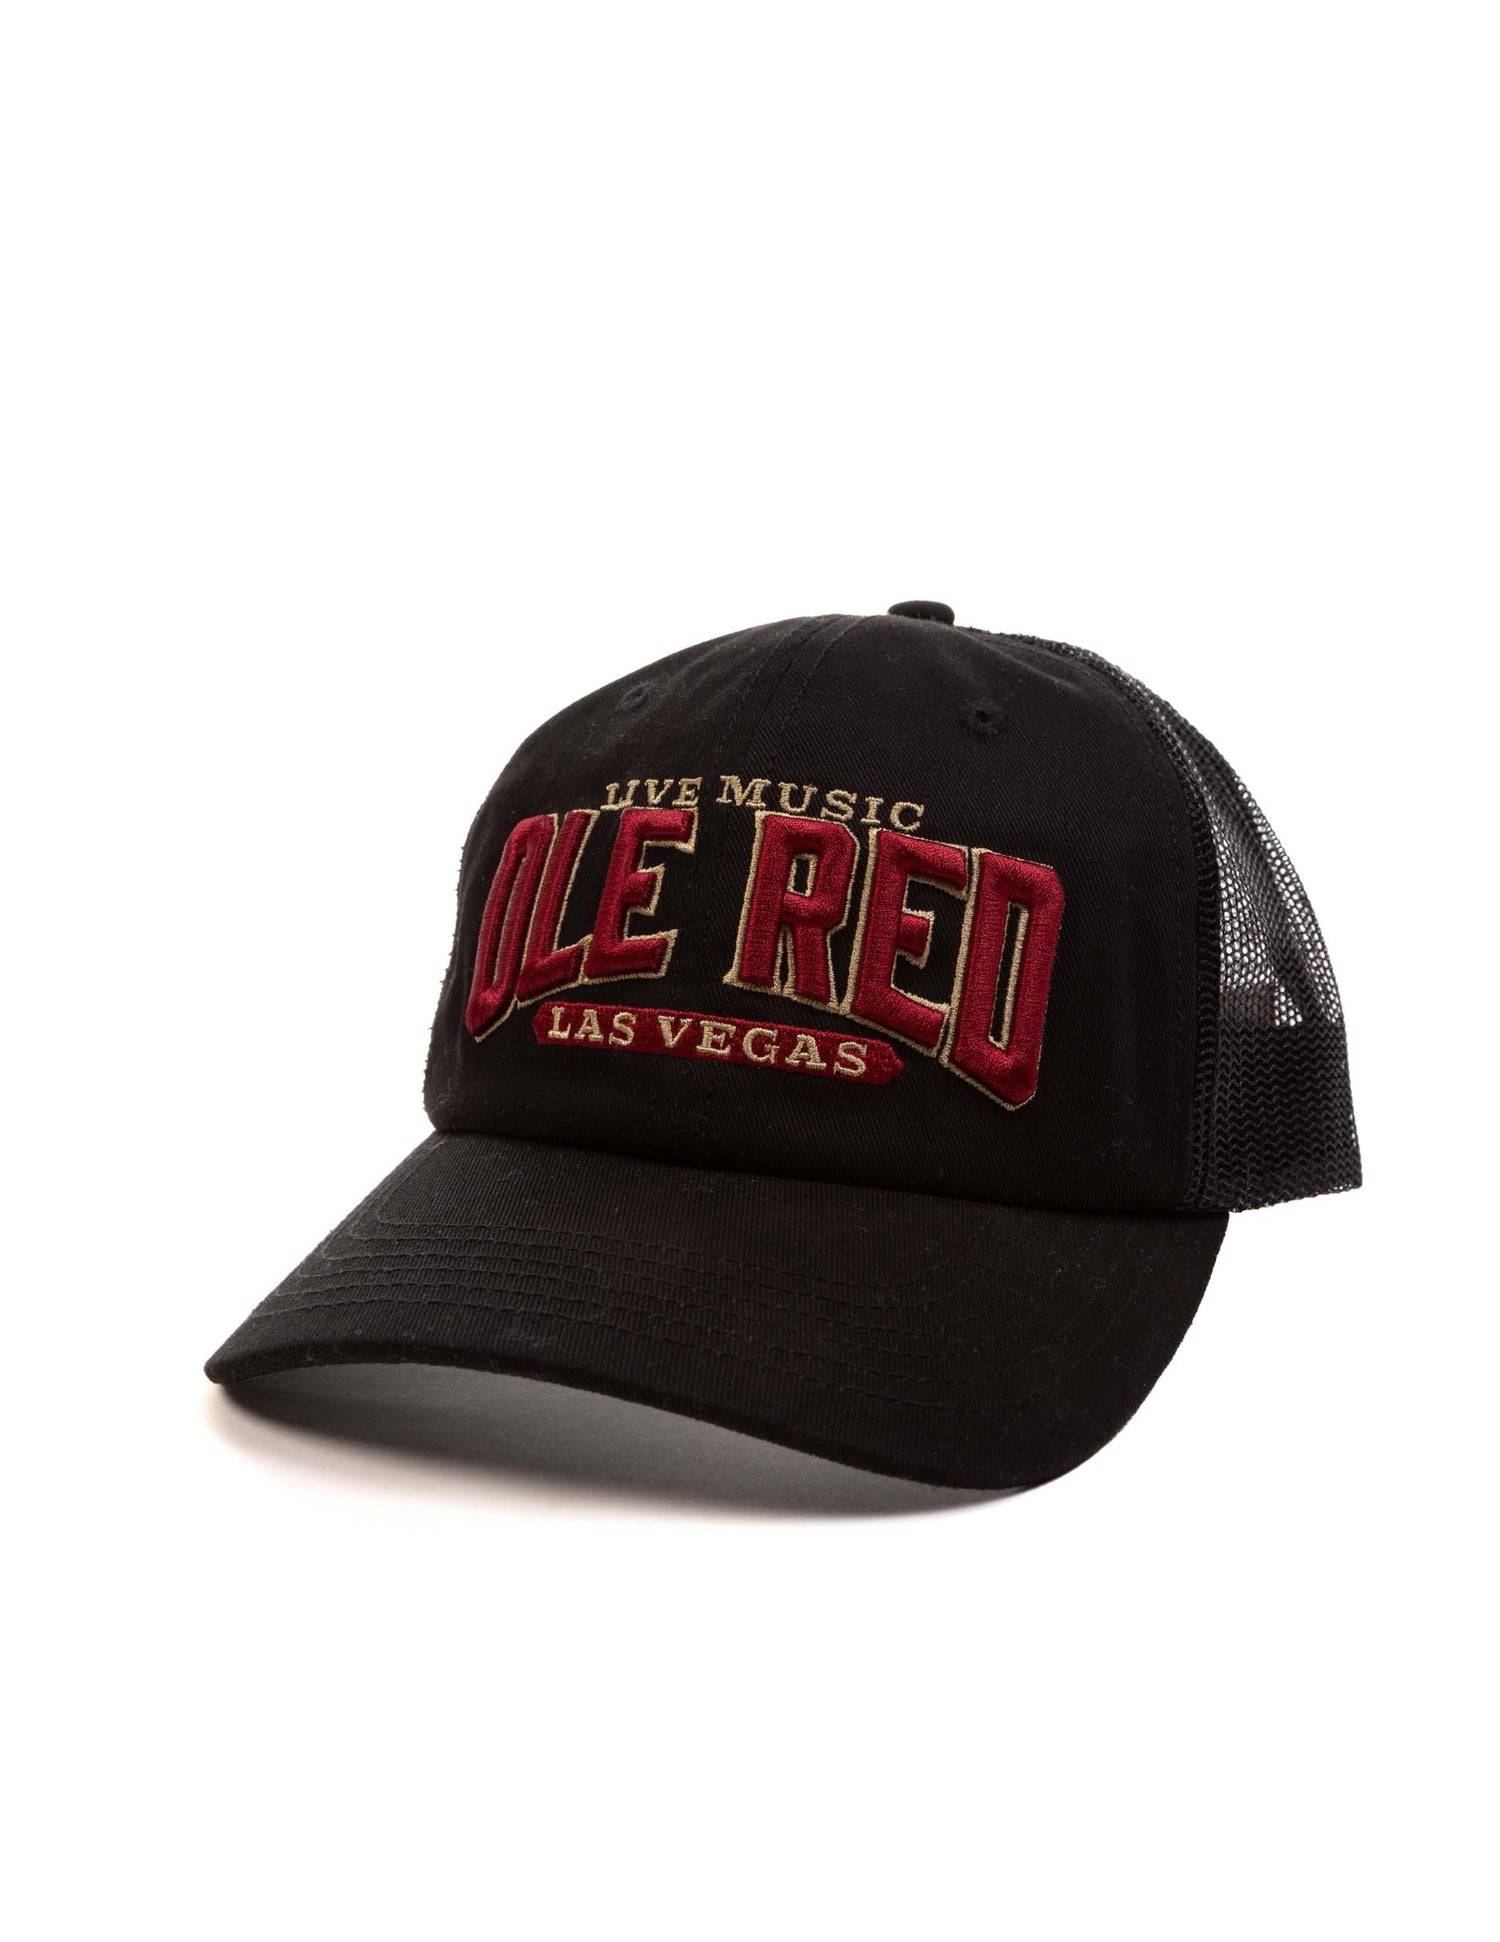 Ole Red Vegas Classic Dad Hat